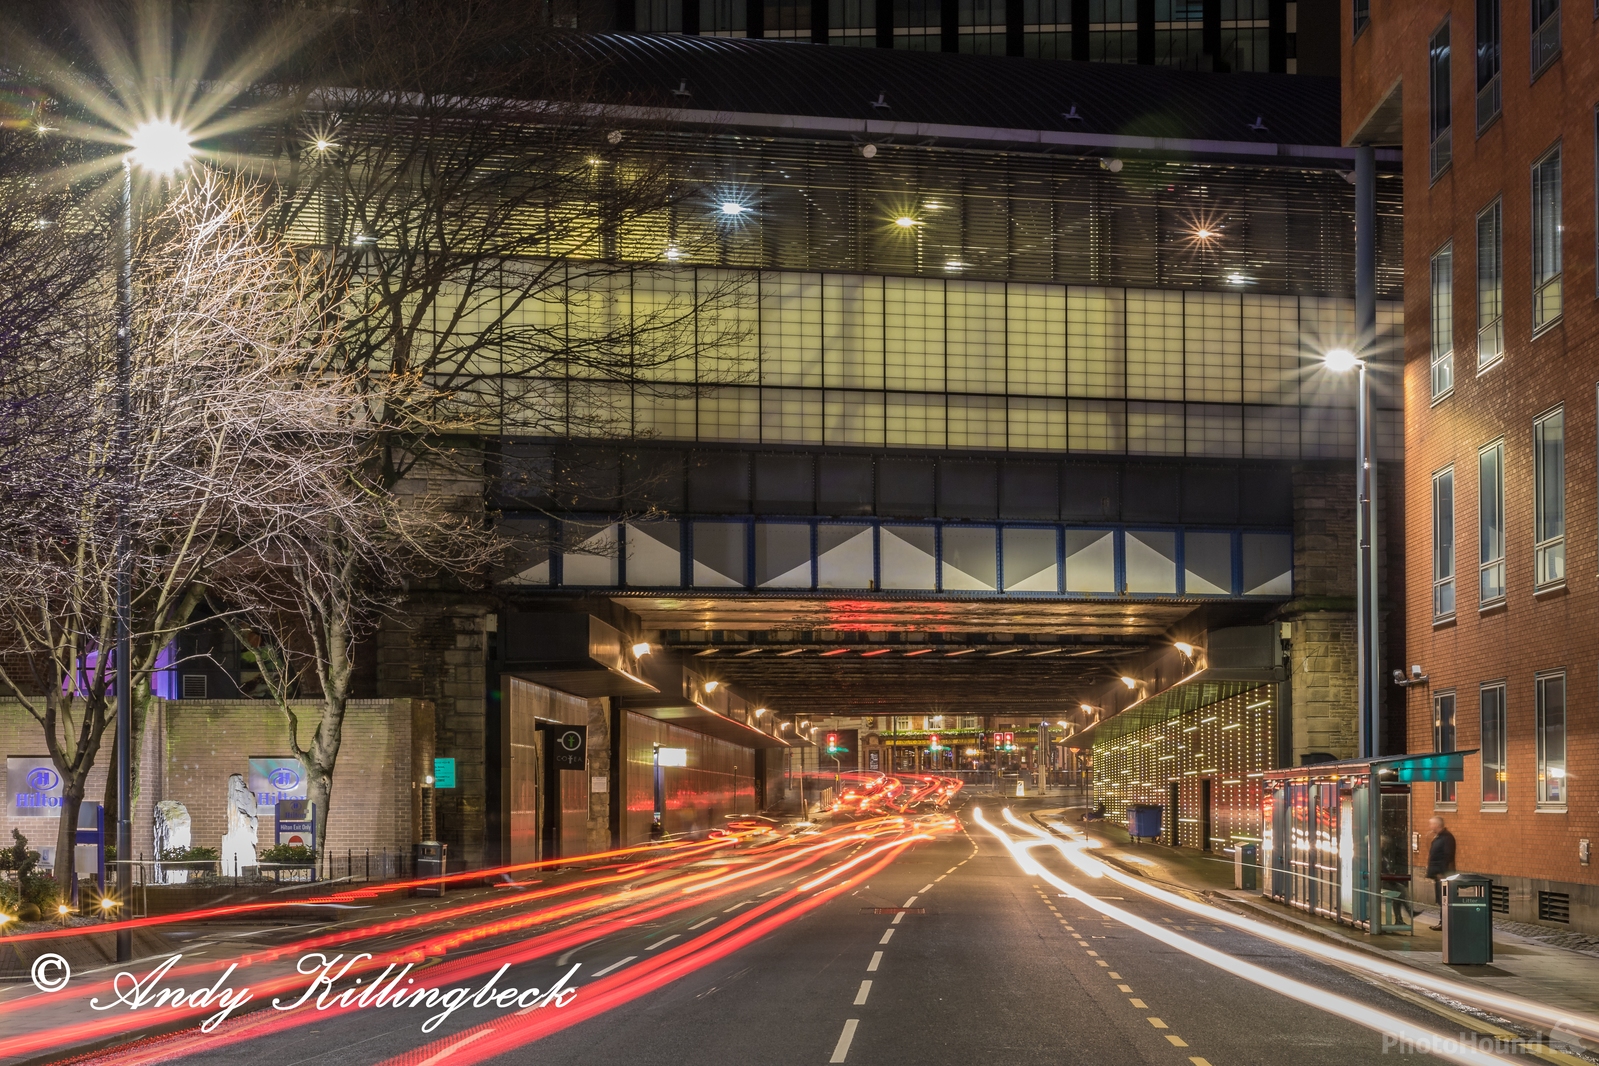 Image of Granary Wharf by Andy Killingbeck